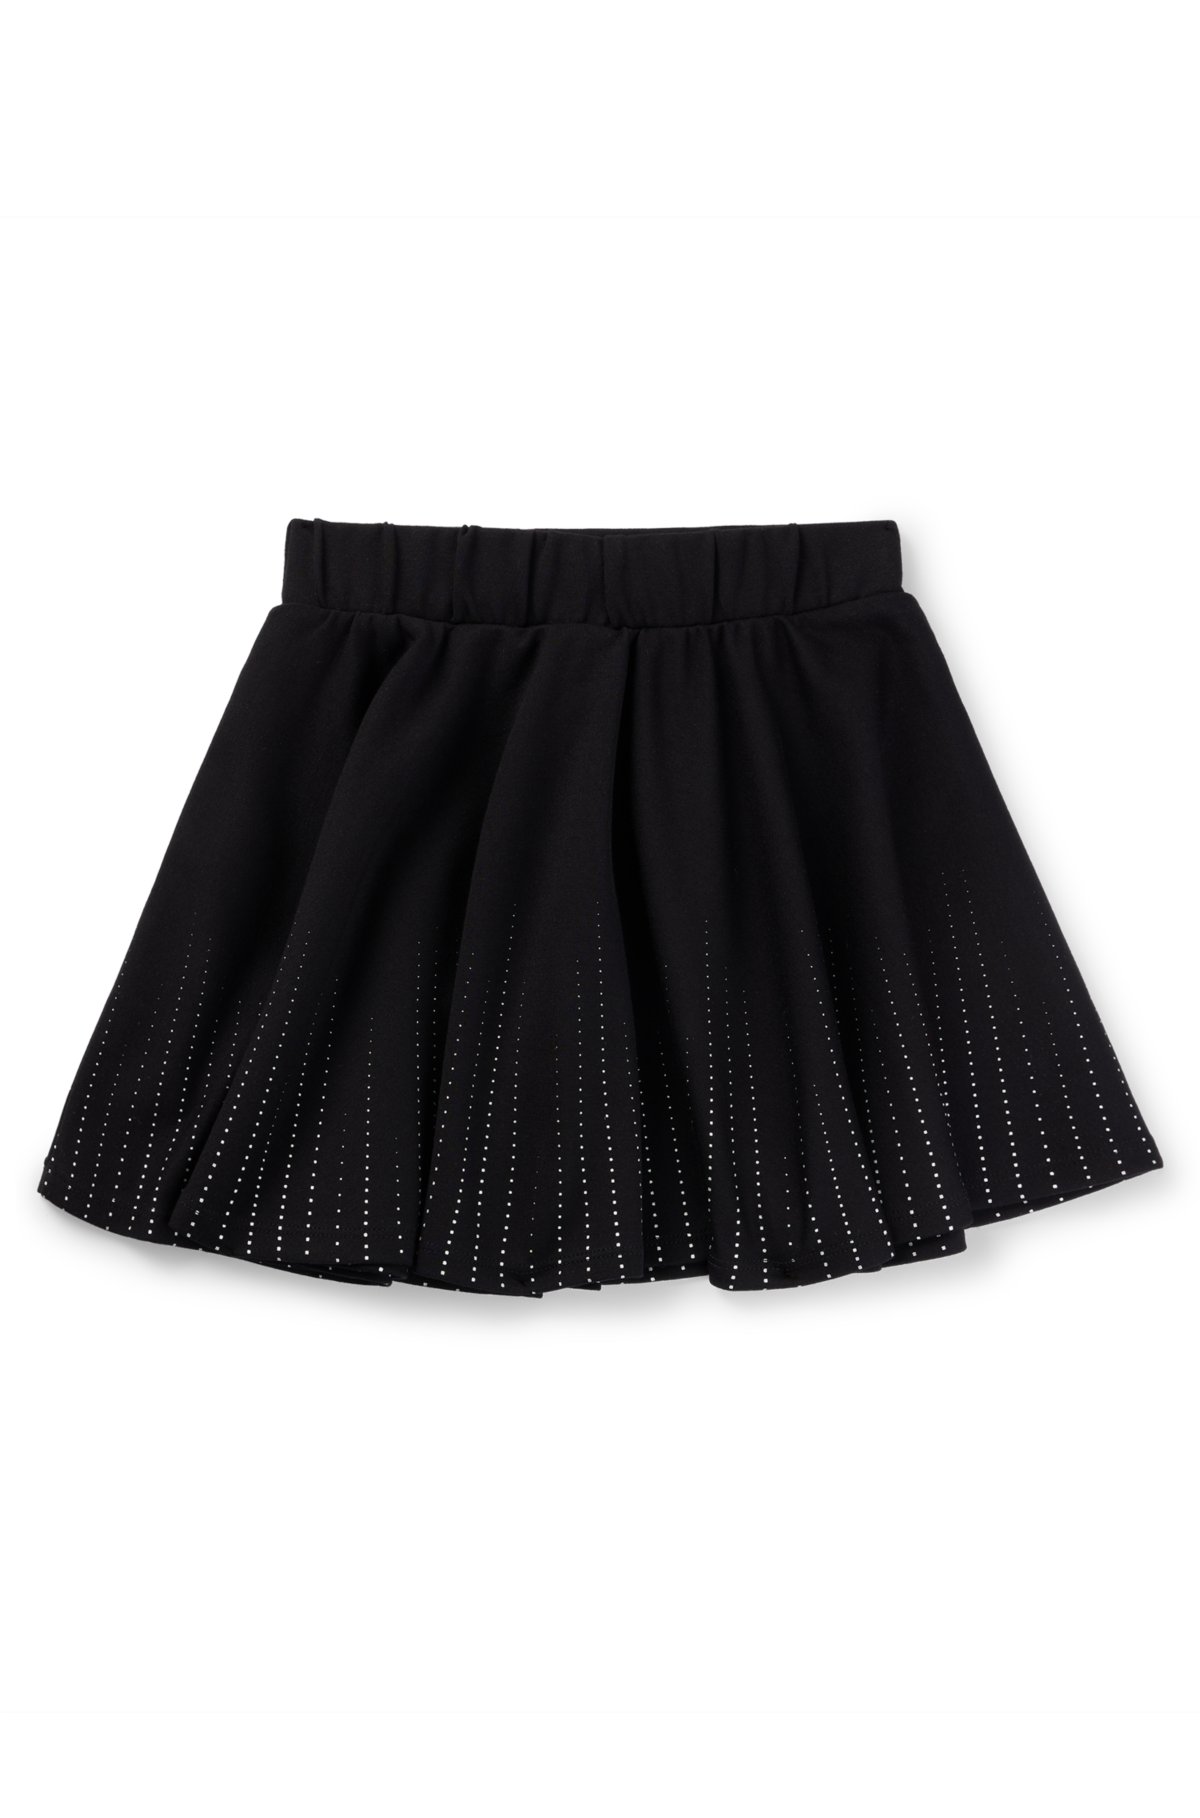 Kids' skater skirt in stretch fabric with lustrous print, Black